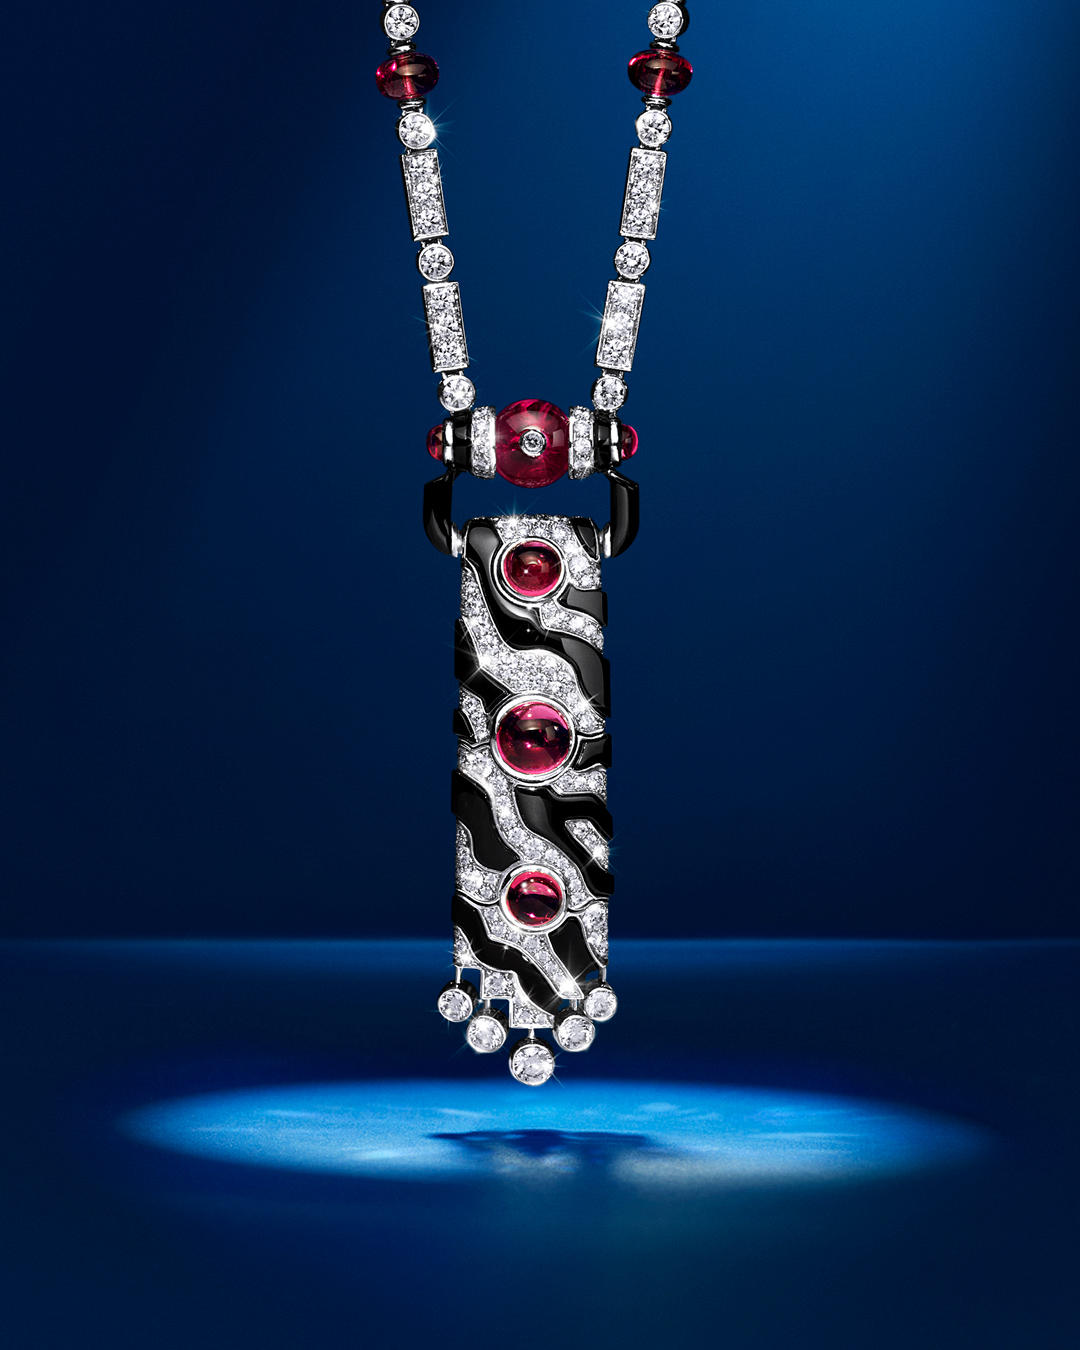 image  1 Cartier Official - A chromatic palette of onyx and rubellite gives a powerful rhythm to this #Cartie